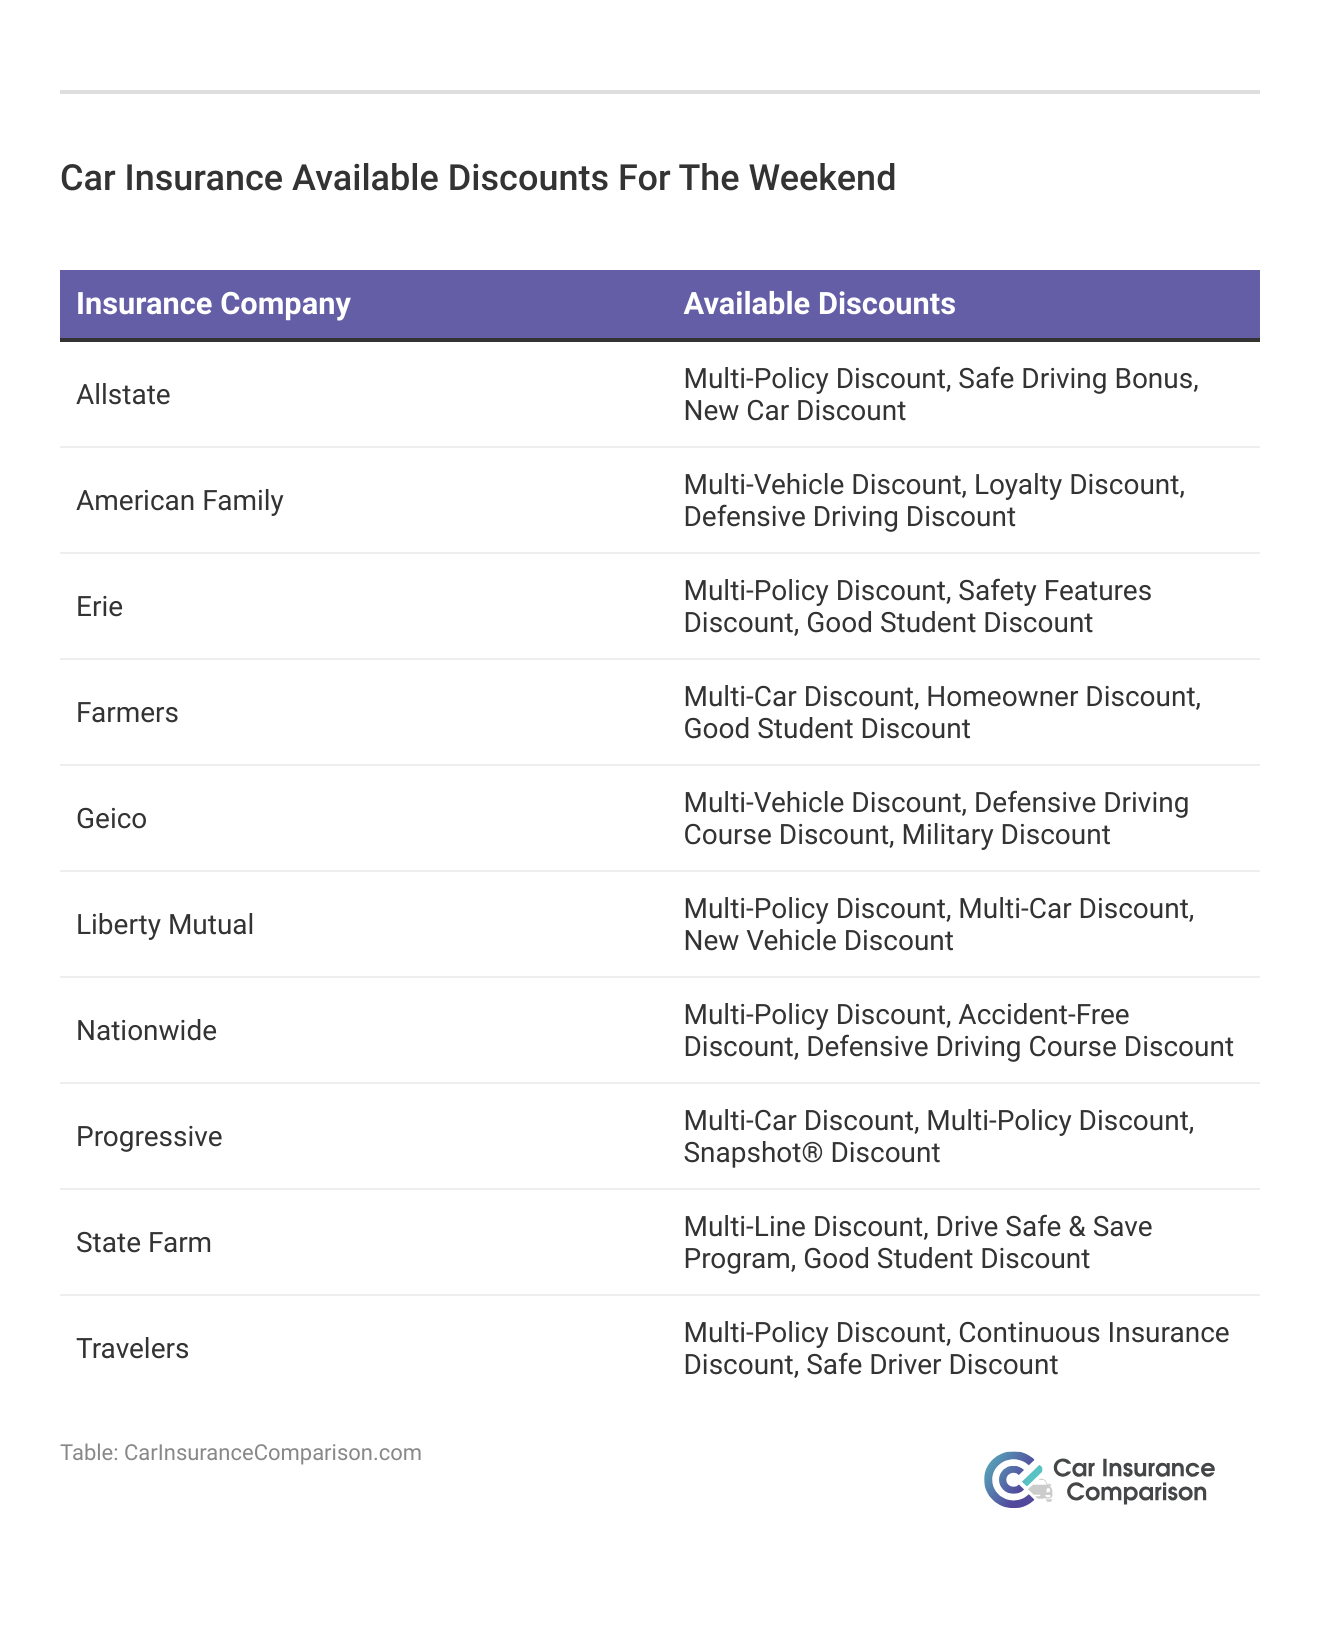 <h3>Car Insurance Available Discounts For The Weekend</h3>